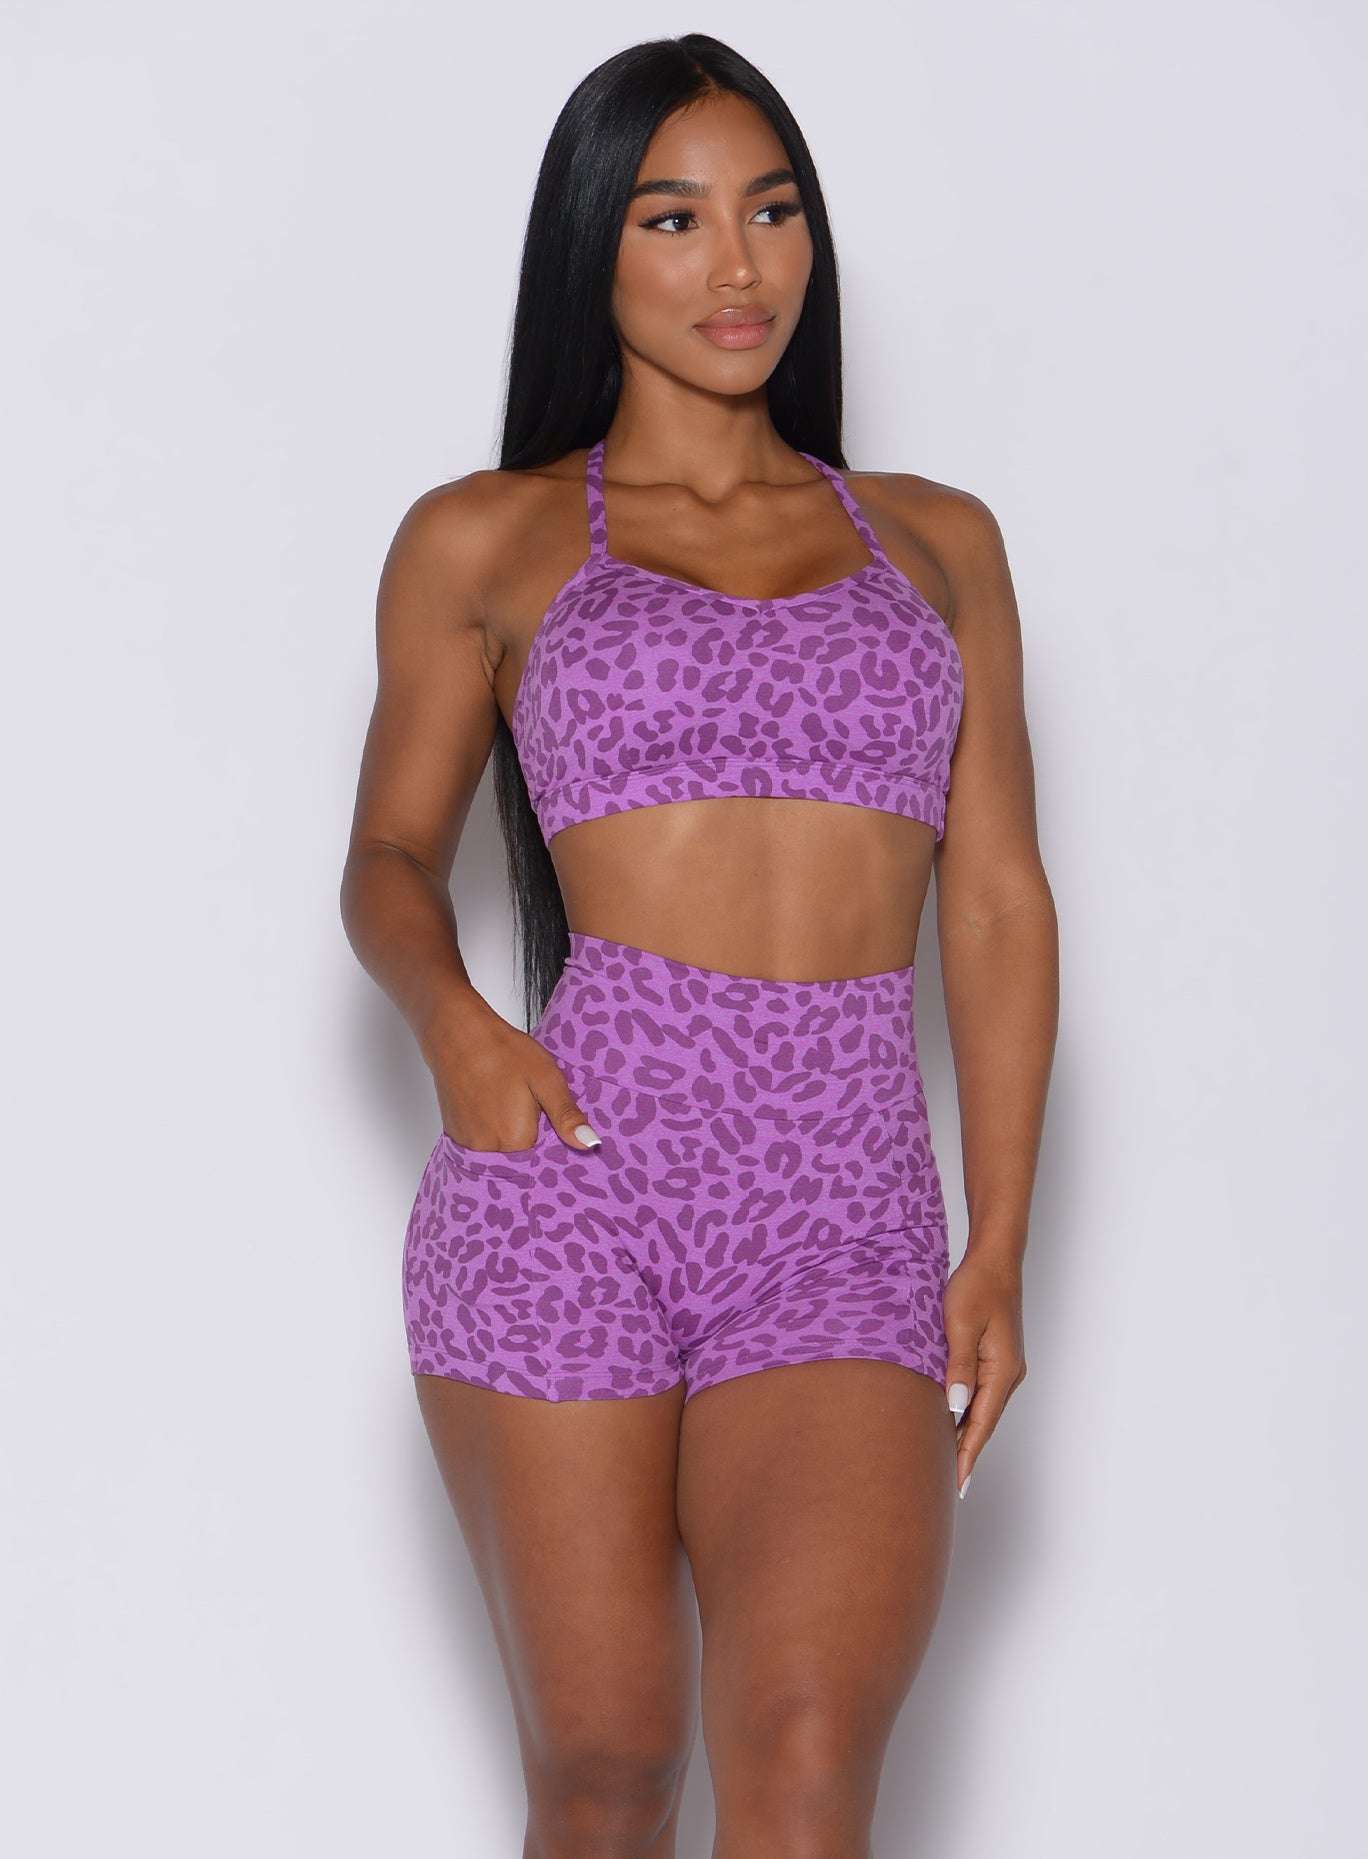 Front profile view of a model with her right hand in pocket wearing our pumped sports bra in purple cheetah color and matching shorts